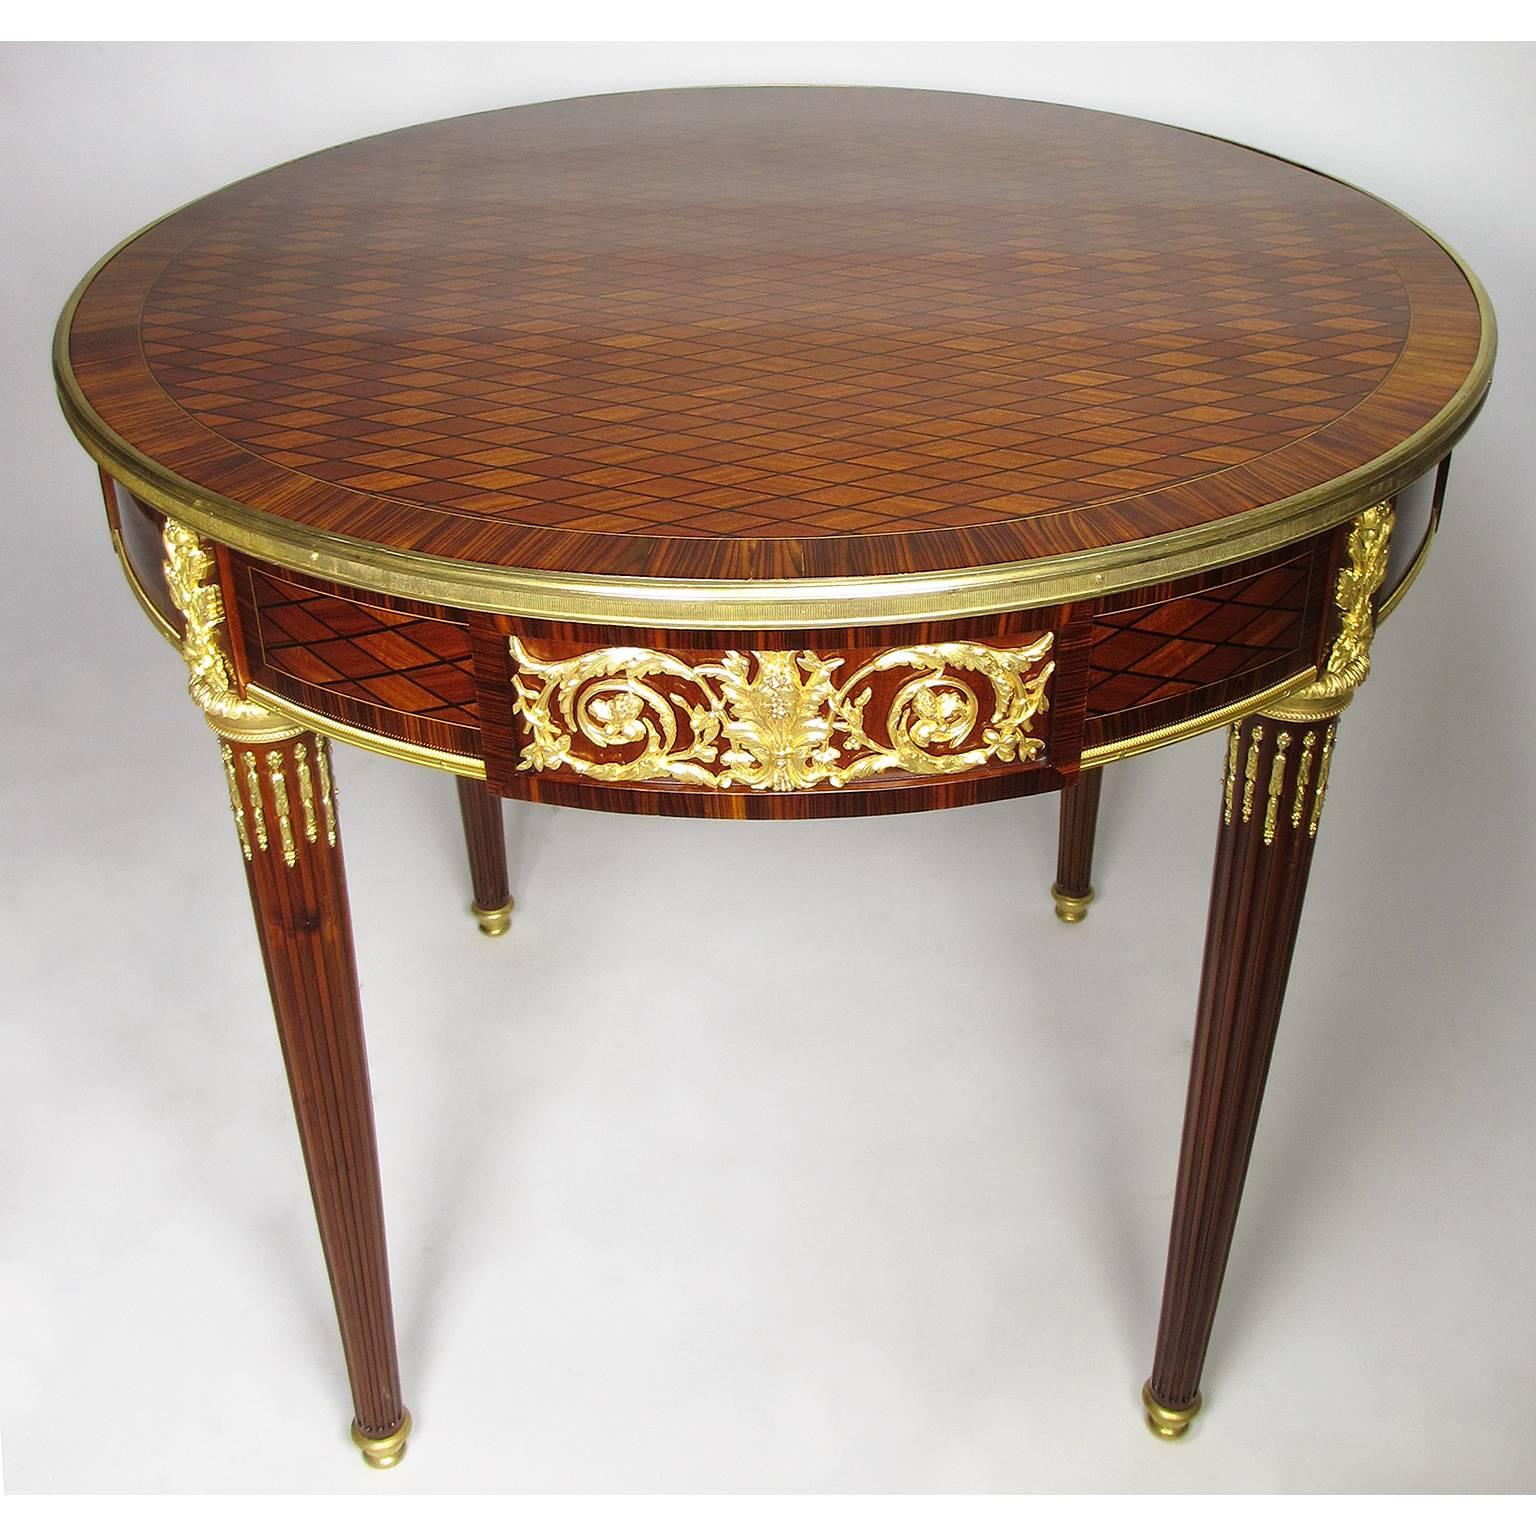 A very fine French Belle Époque 19th-20th century Louis XVI style tulipwood parquetry and ormolu-mounted guéridon (round table) with a single drawer, circa: Paris, 1900.

Height: 29 3/4 inches (75.6 cm).
Diameter: 33 1/4 inches (84.5 cm).

